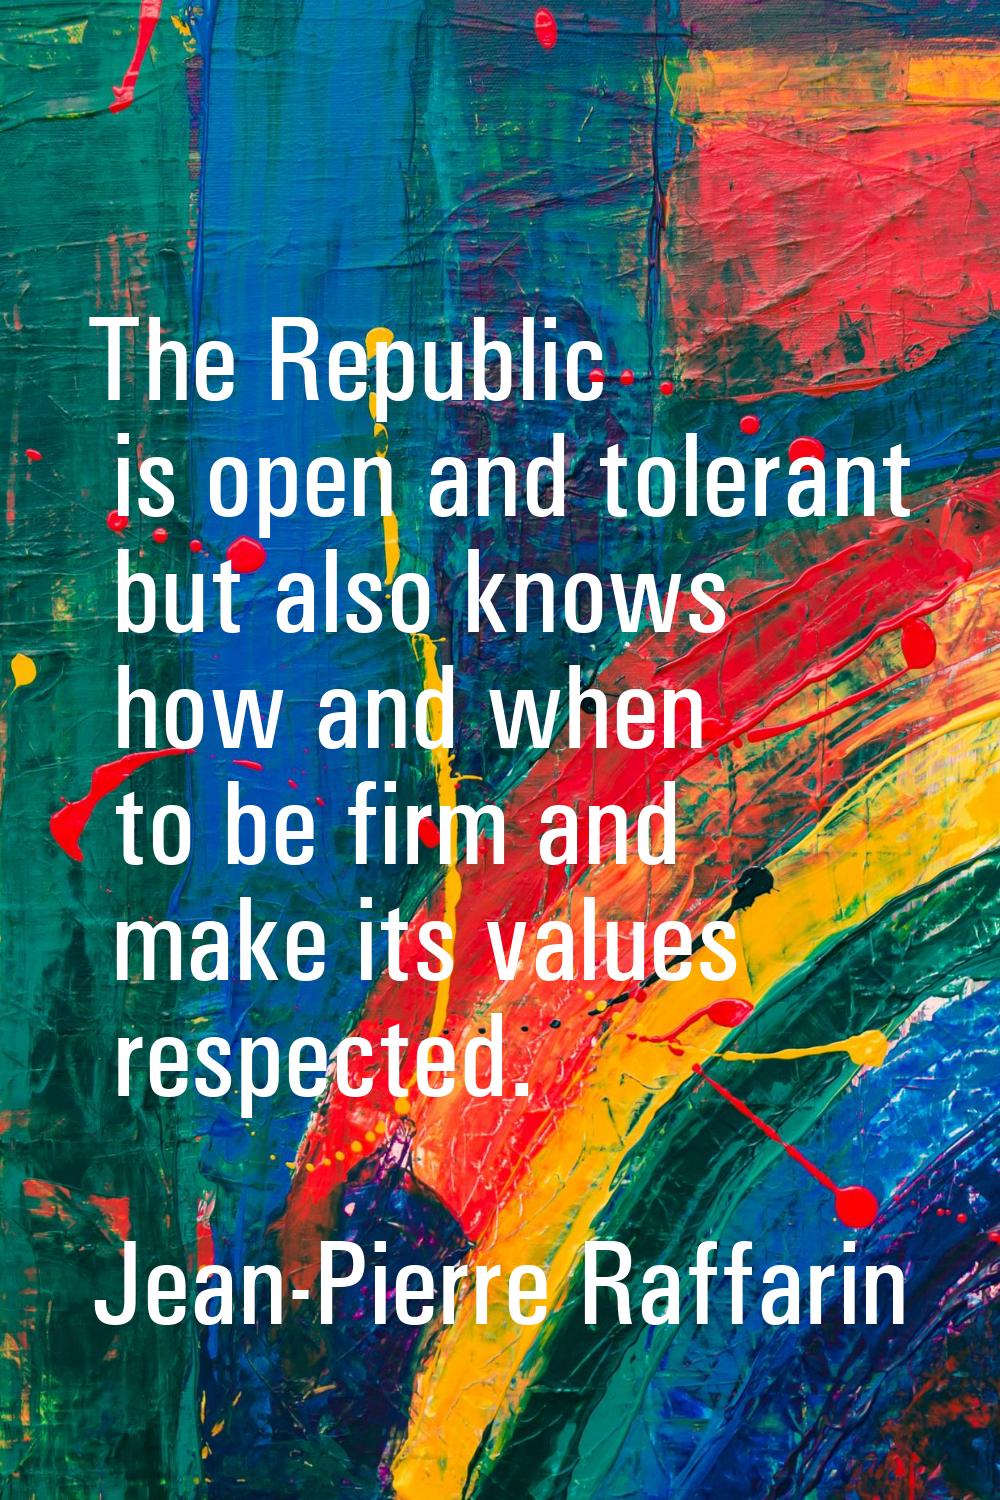 The Republic is open and tolerant but also knows how and when to be firm and make its values respec